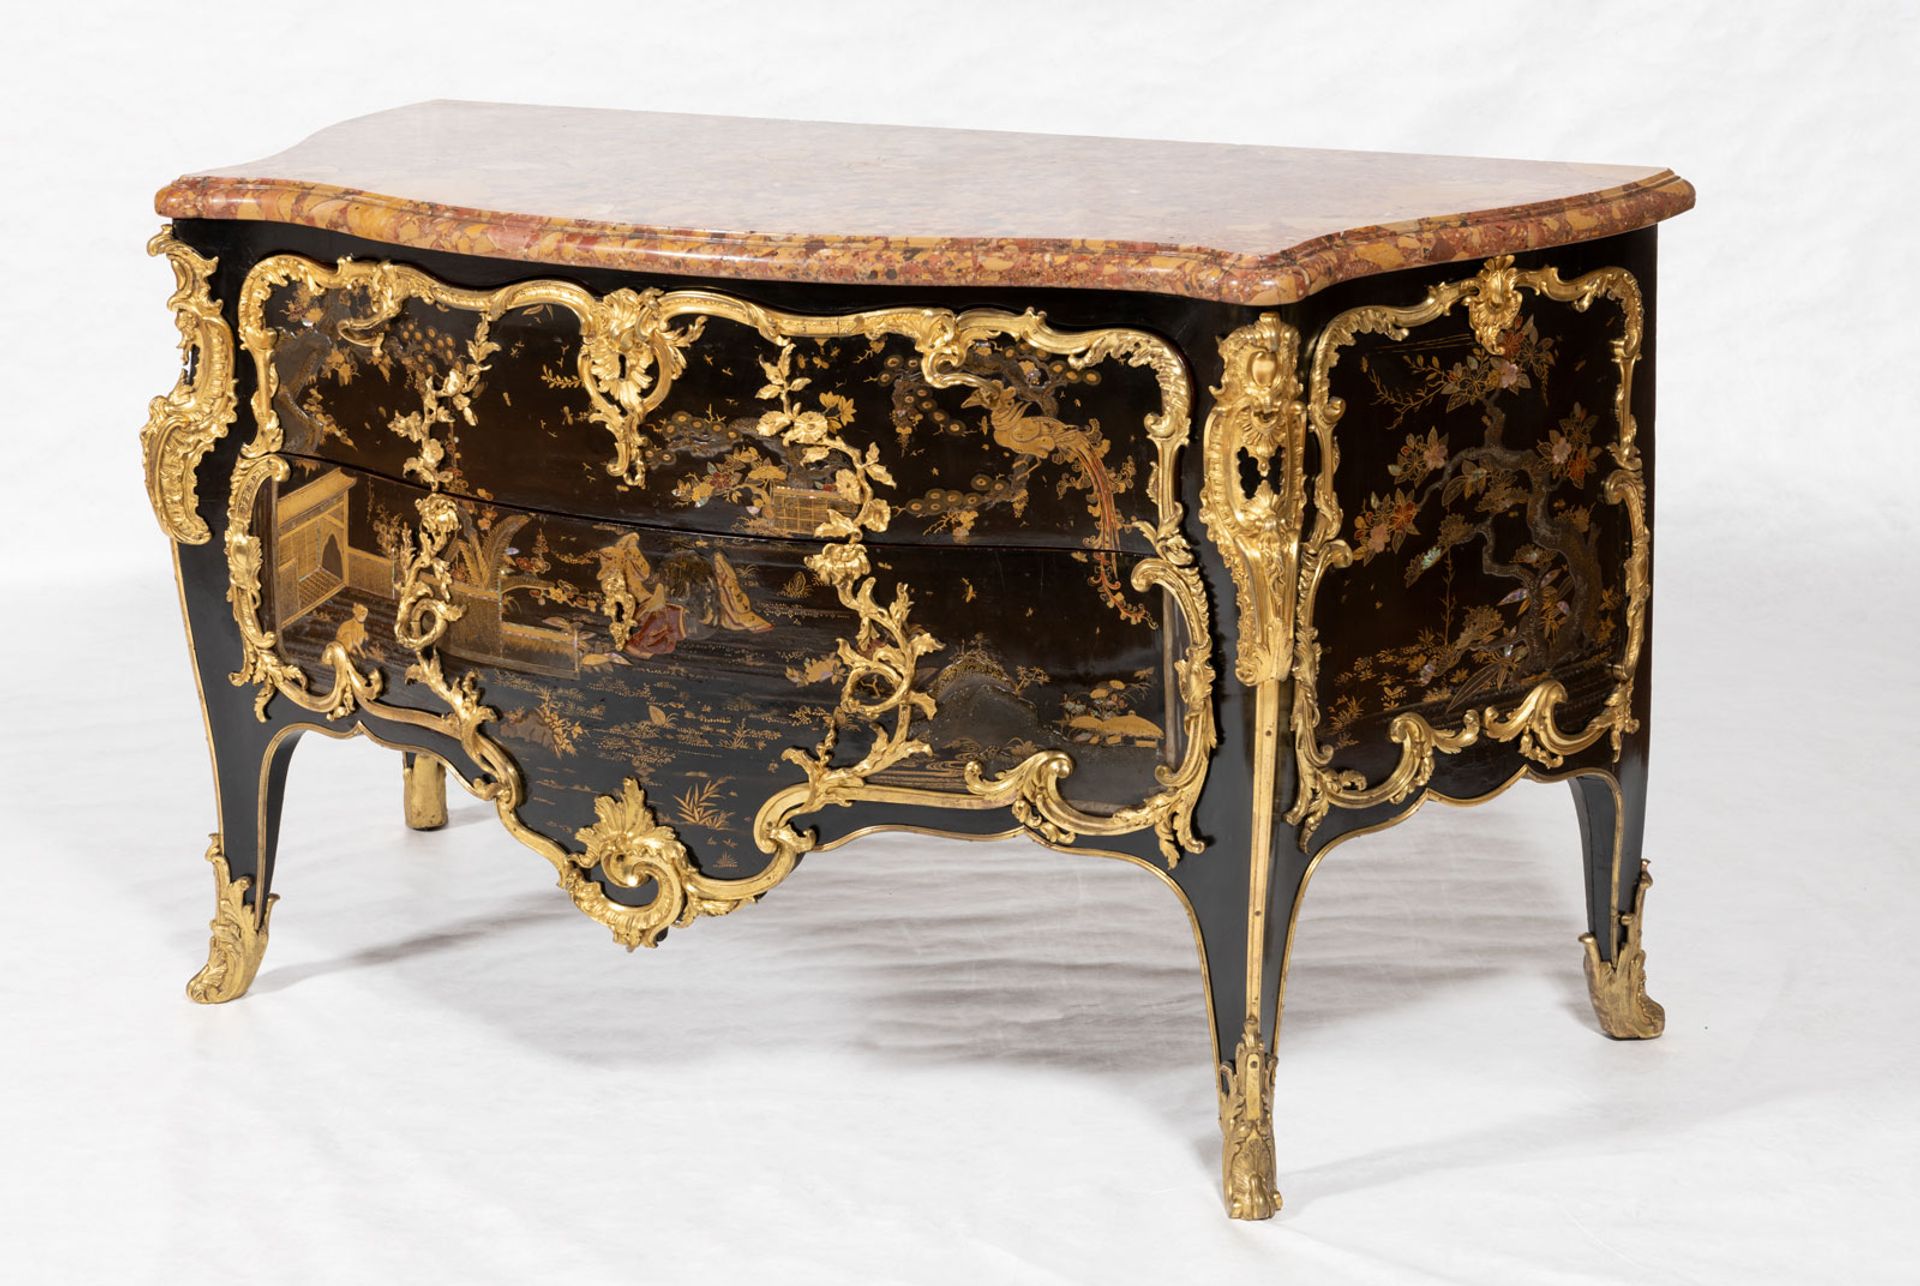 The black-lacquered commode by Bernard II van Risenburgh was commissioned in 1744 for Louis XV's stepdaughter © EPV / Christophe Fouin